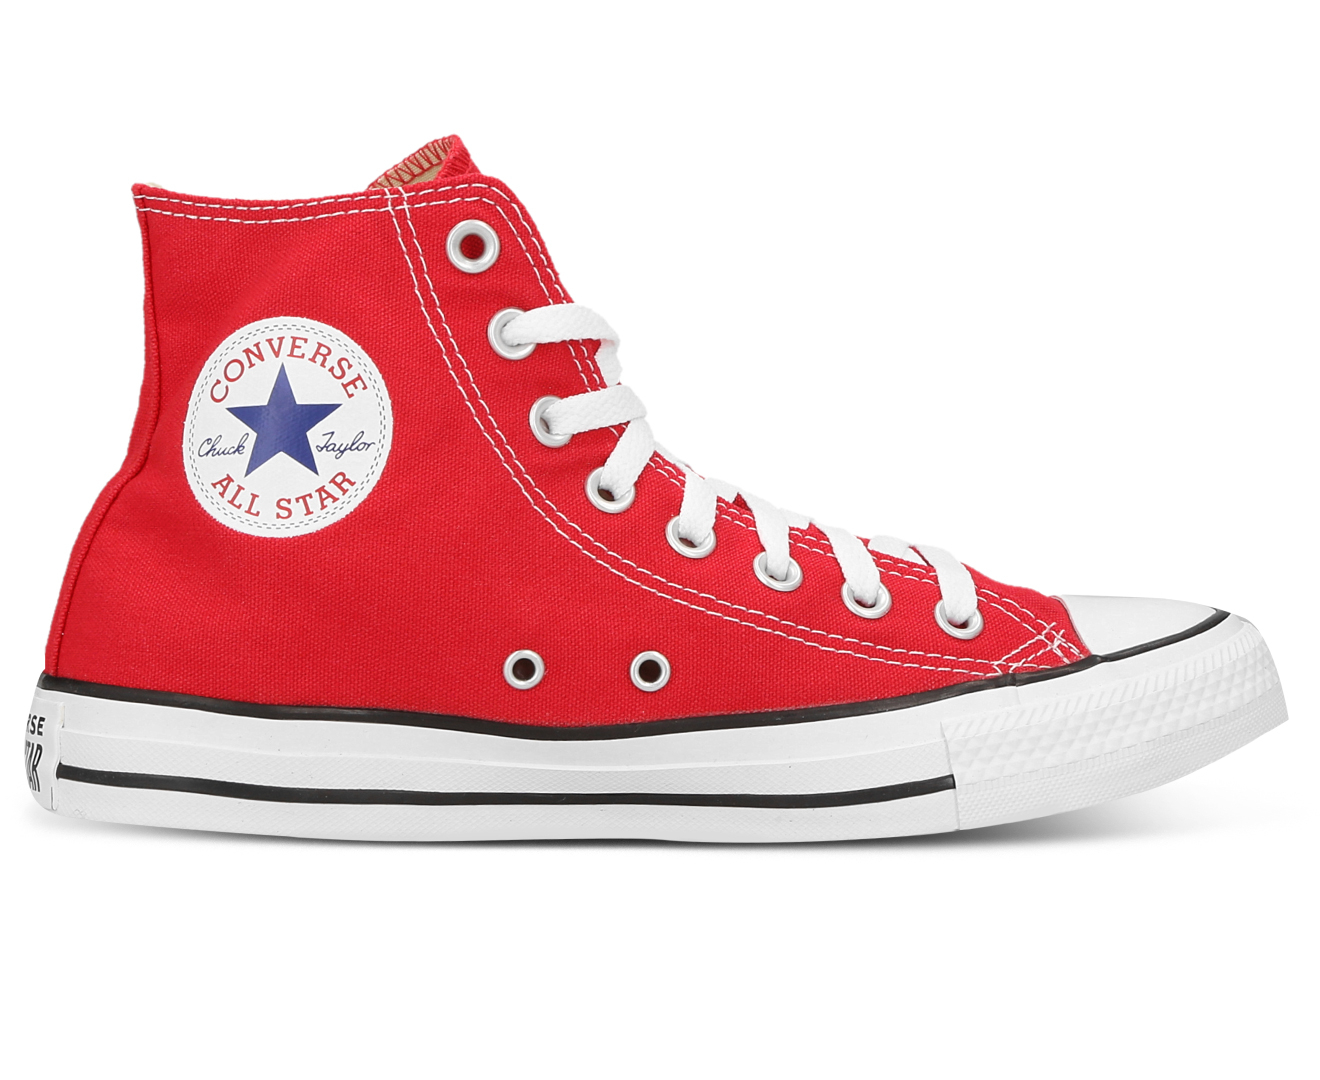 Converse Unisex Chuck Taylor All Star High Top Sneakers - Red | Catch.co.nz